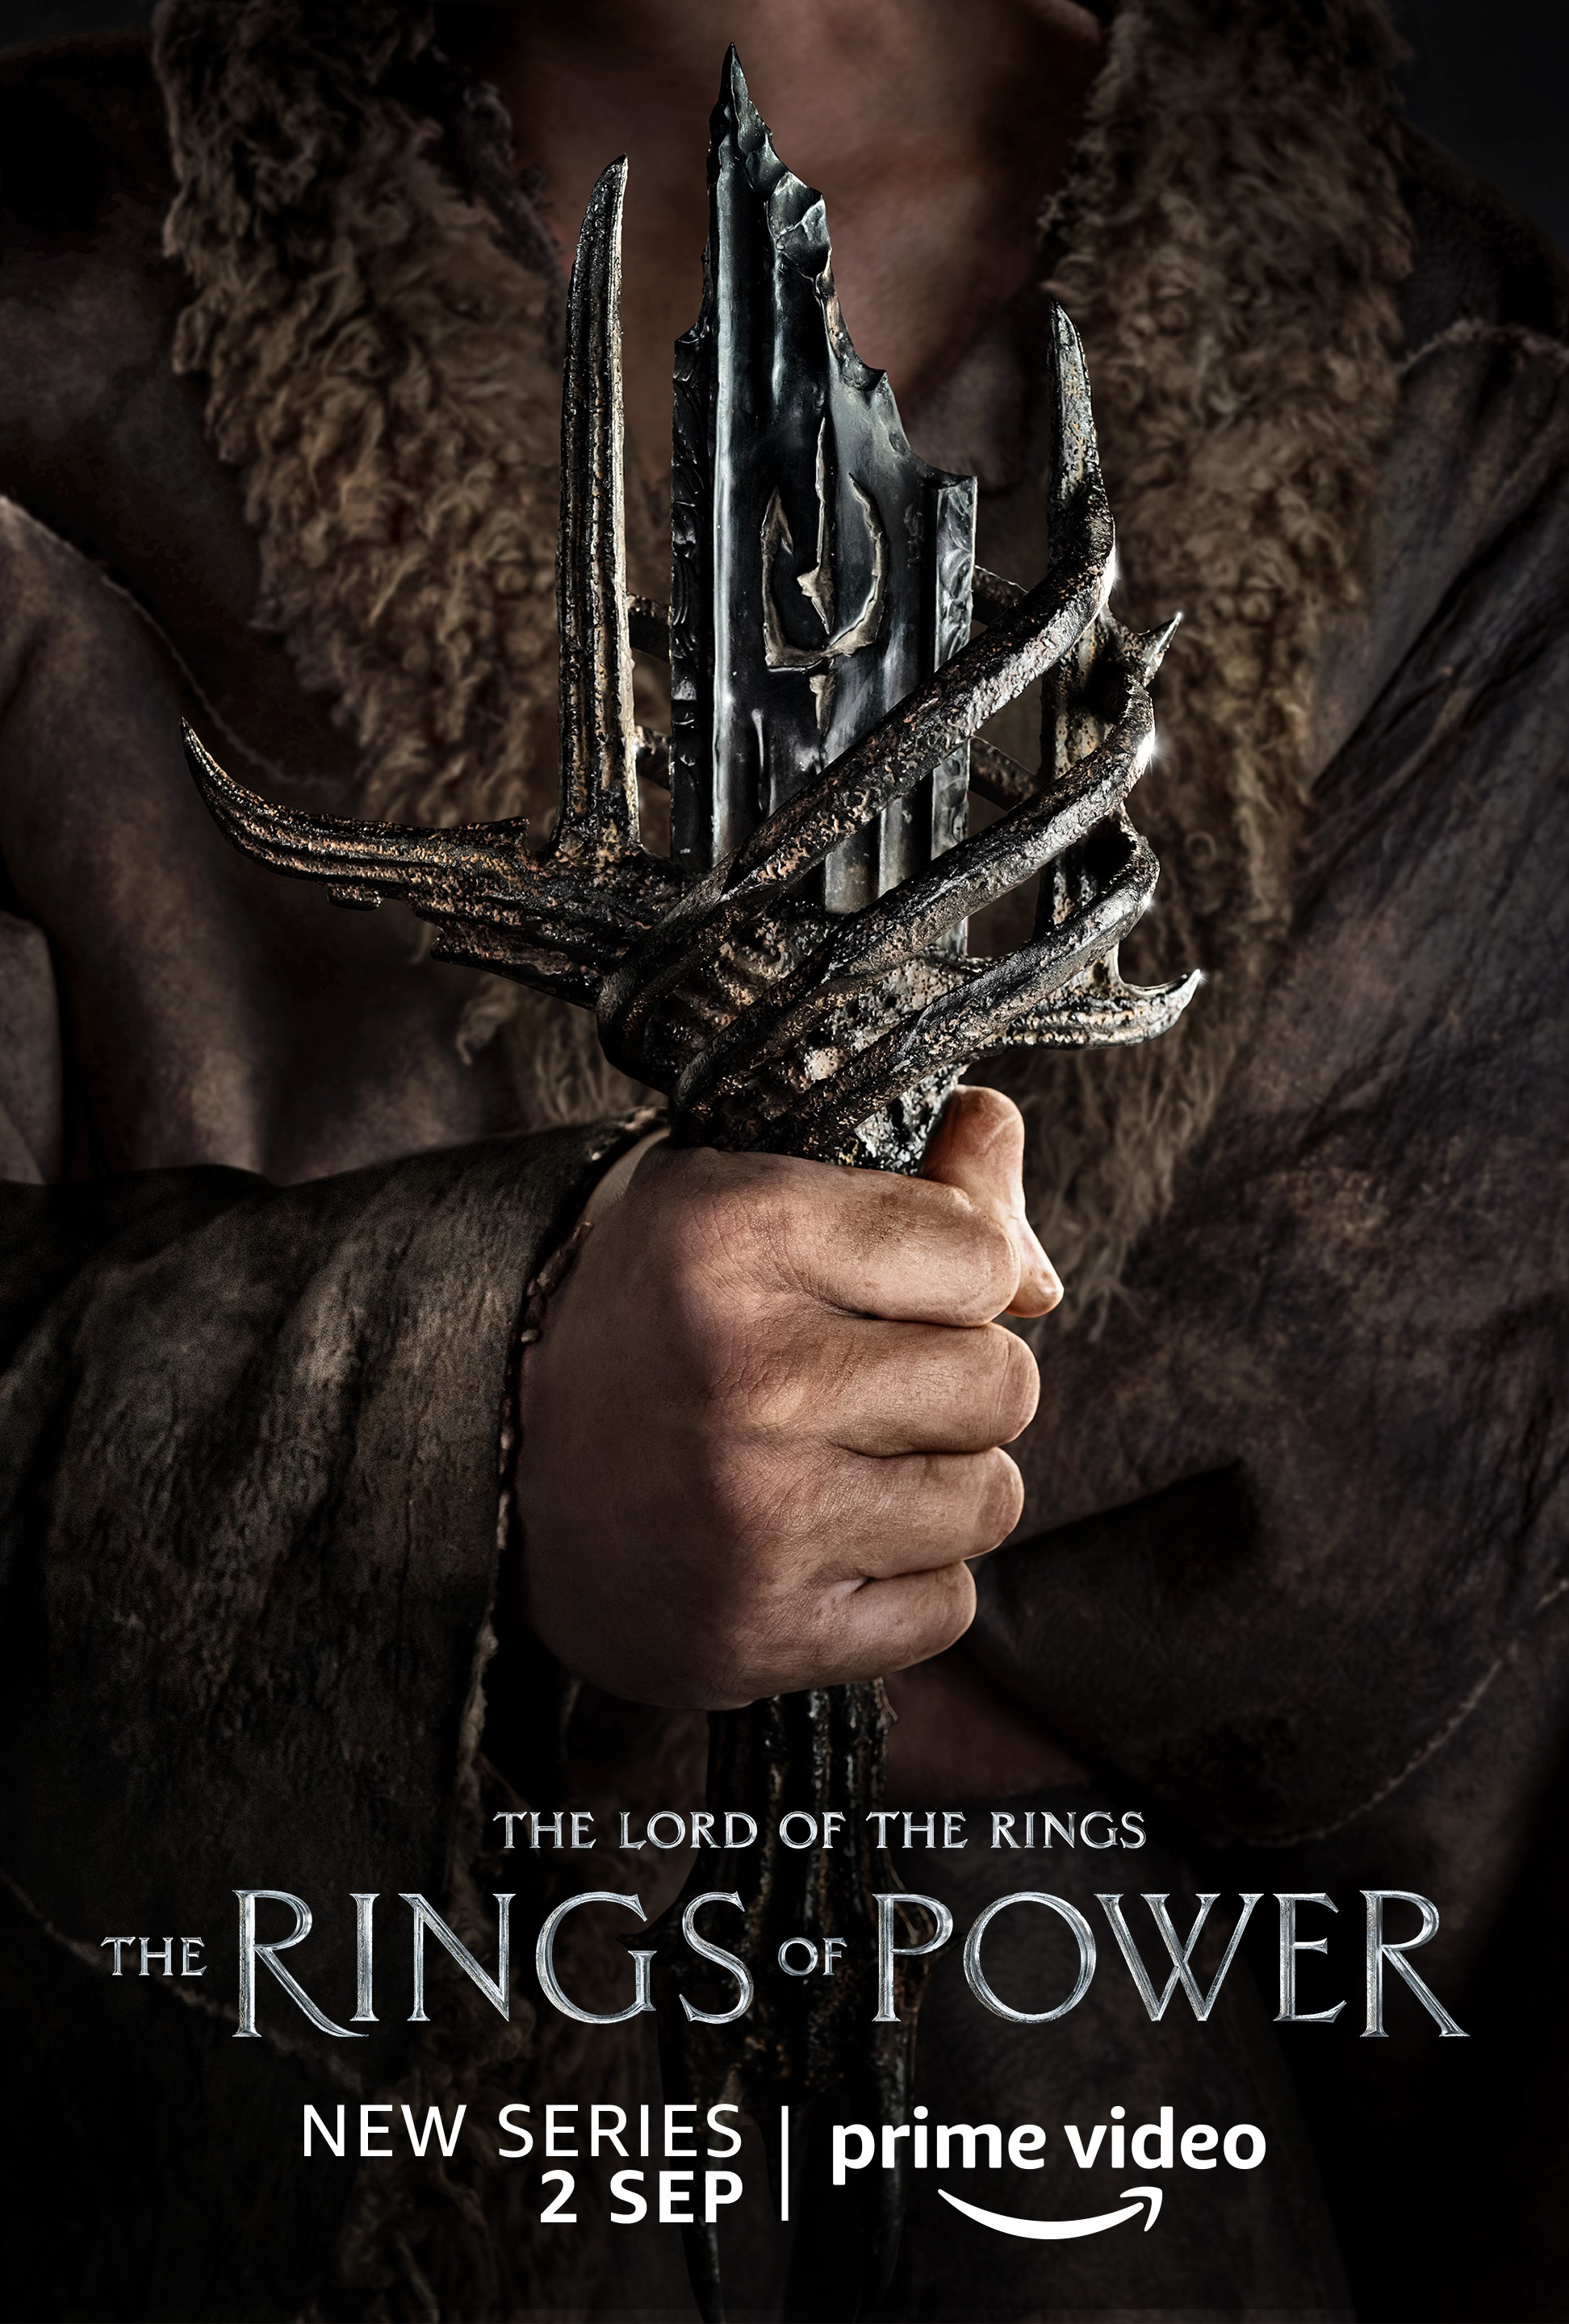 A man holding a broken sword character poster for Lord of the Rings: The Rings of Power